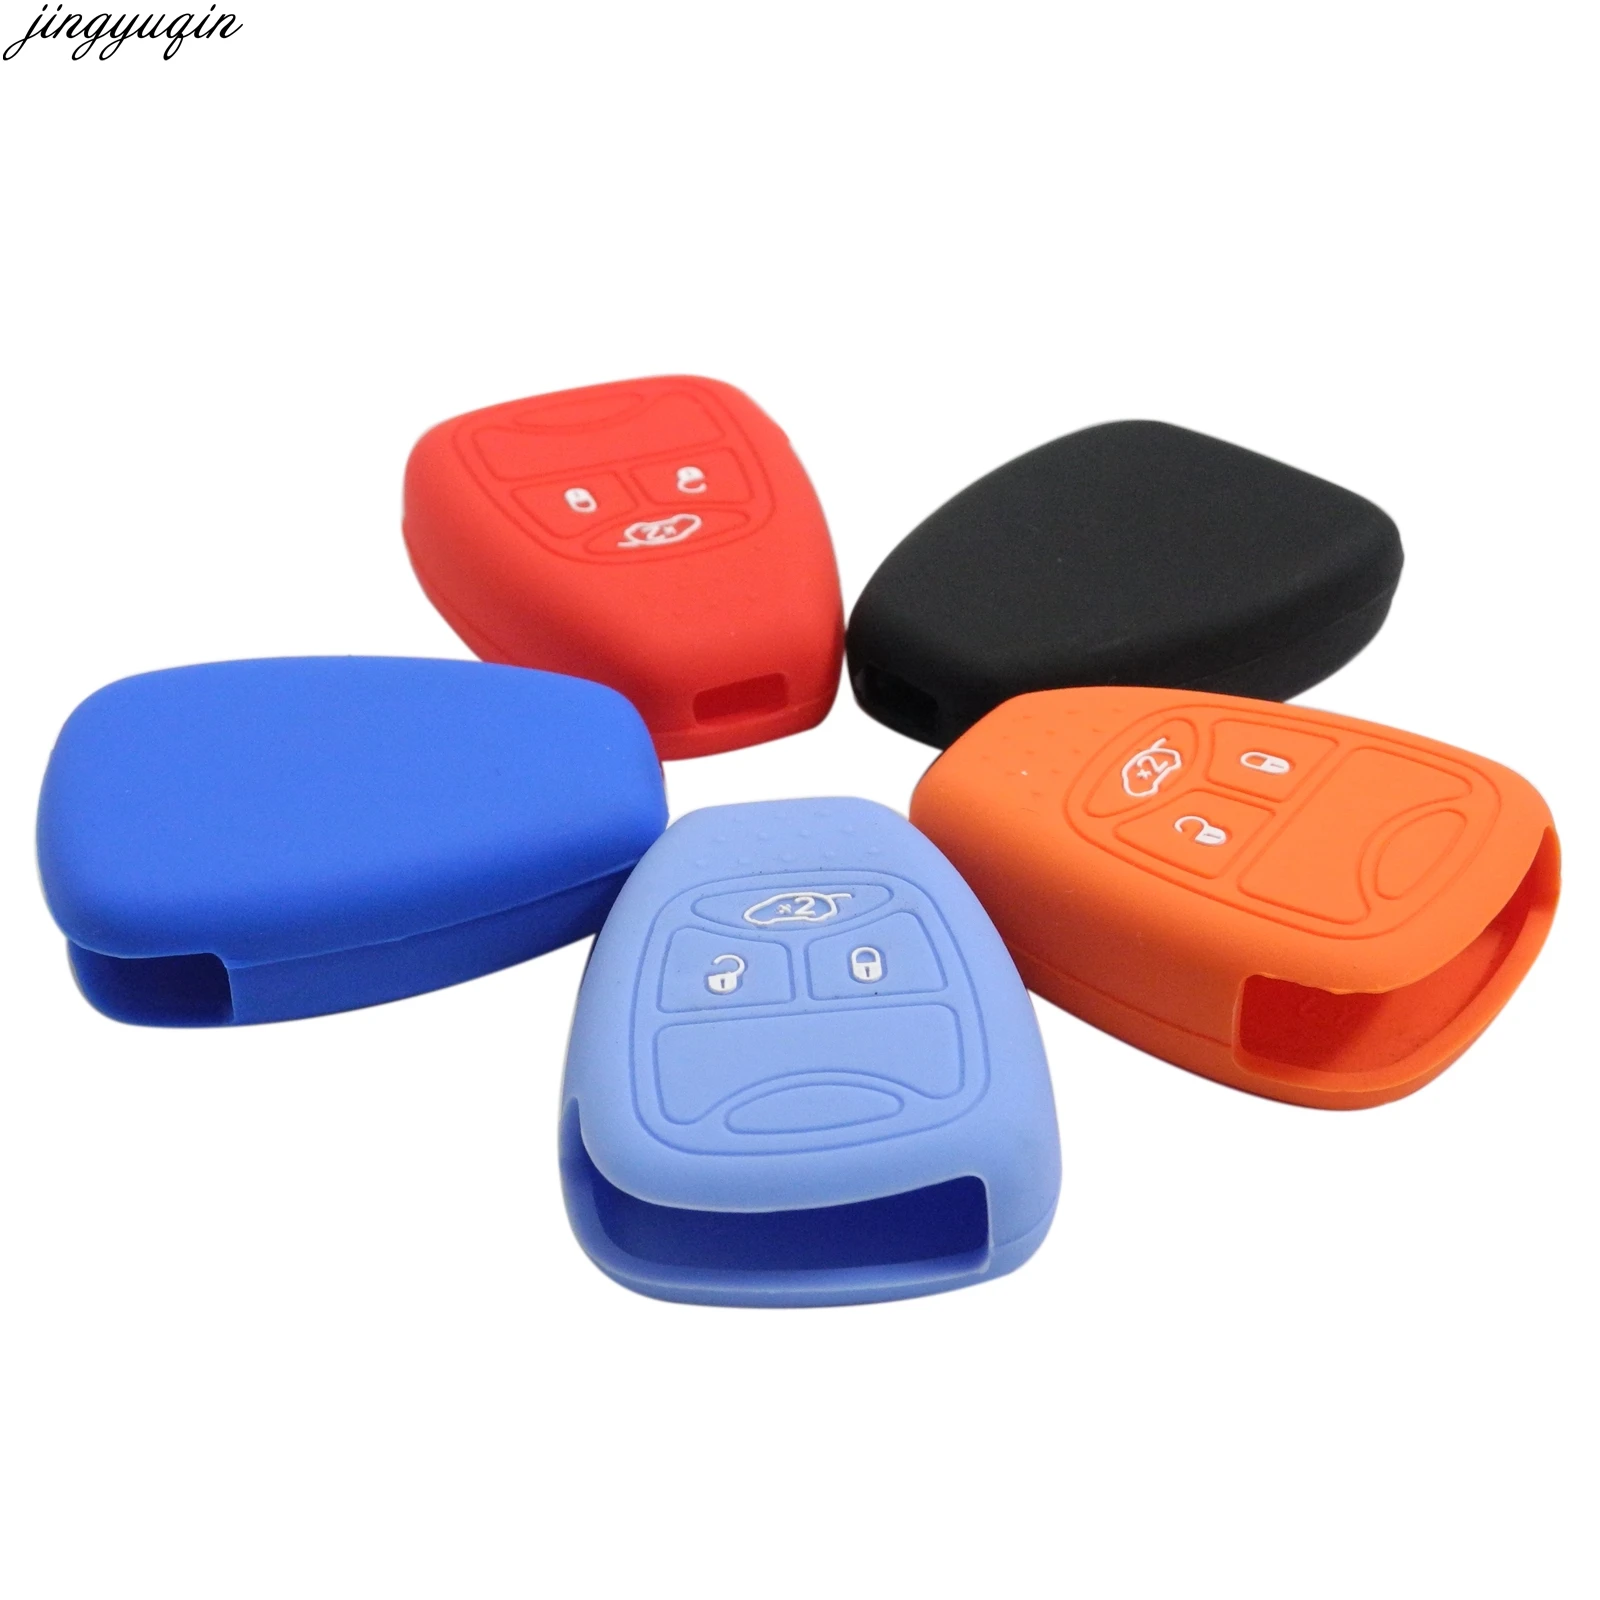 

Jingyuqin 30pcs/lot Silicone Car Key Cover Case For Chrysler Dodge Caliber Jeep Patriot Liberty 3/4 Buttons